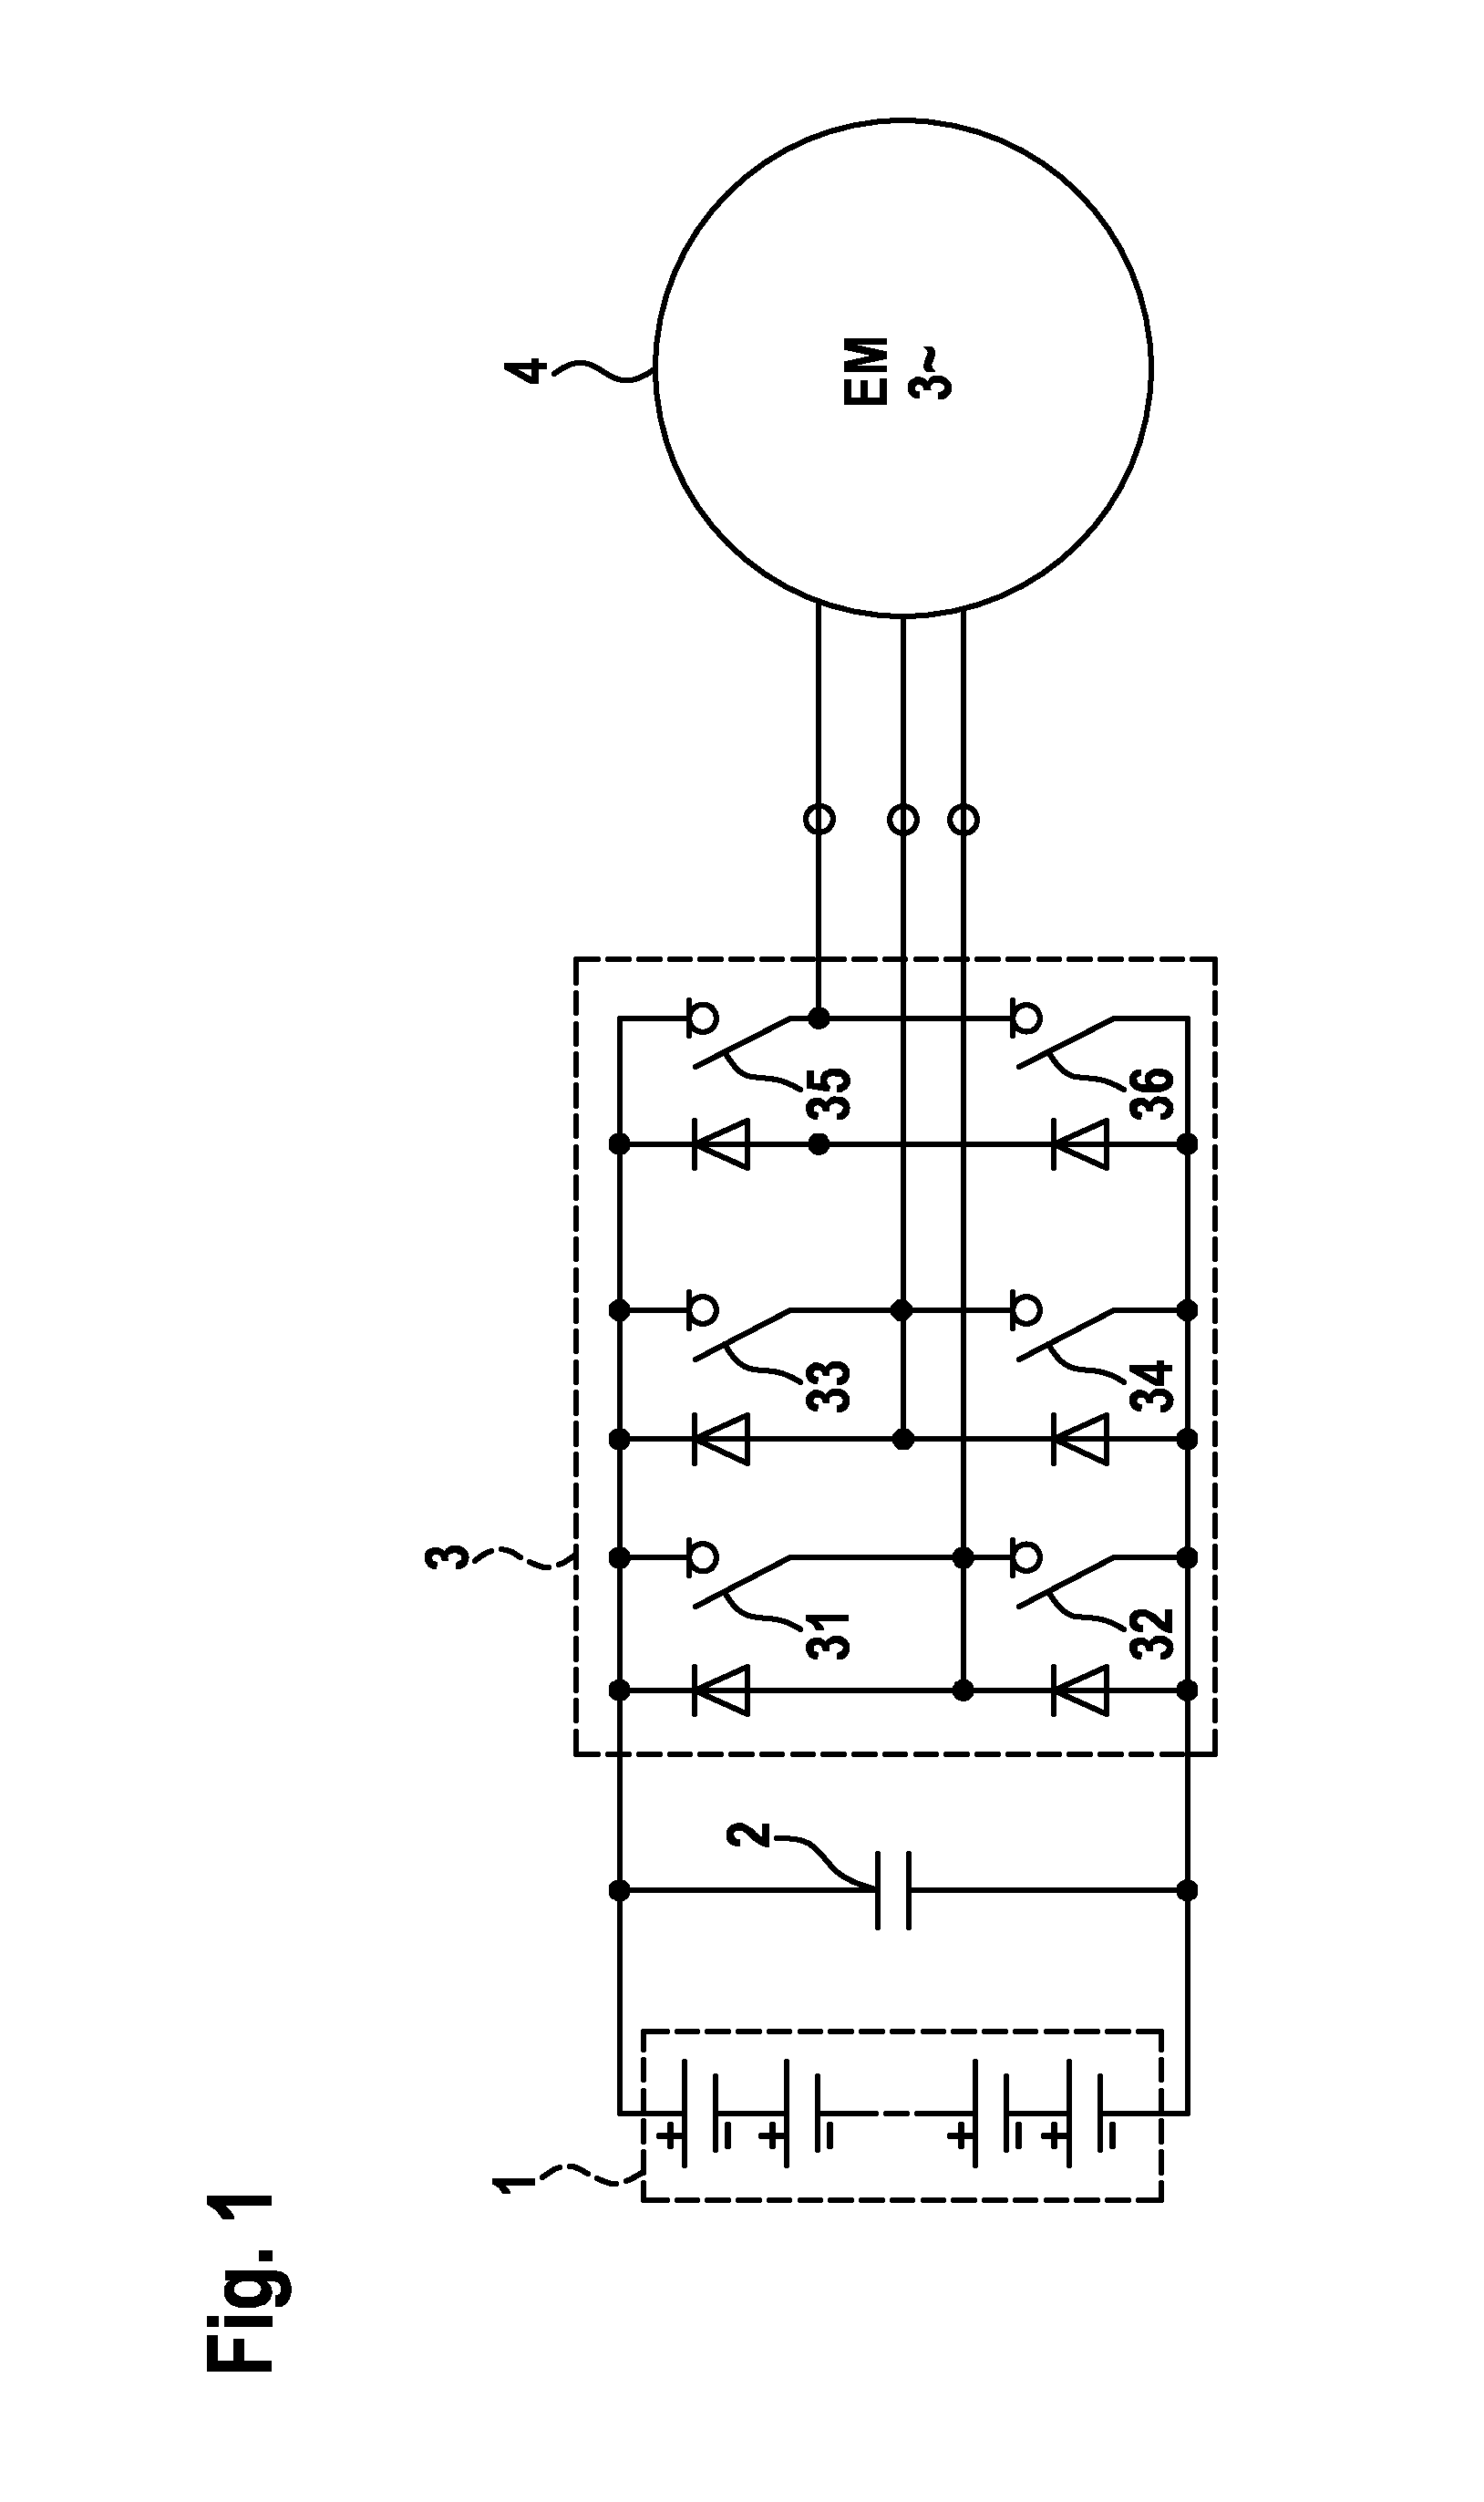 Overvoltage protection circuit for a power semiconductor and method for protecting a power semiconductor from over-voltages